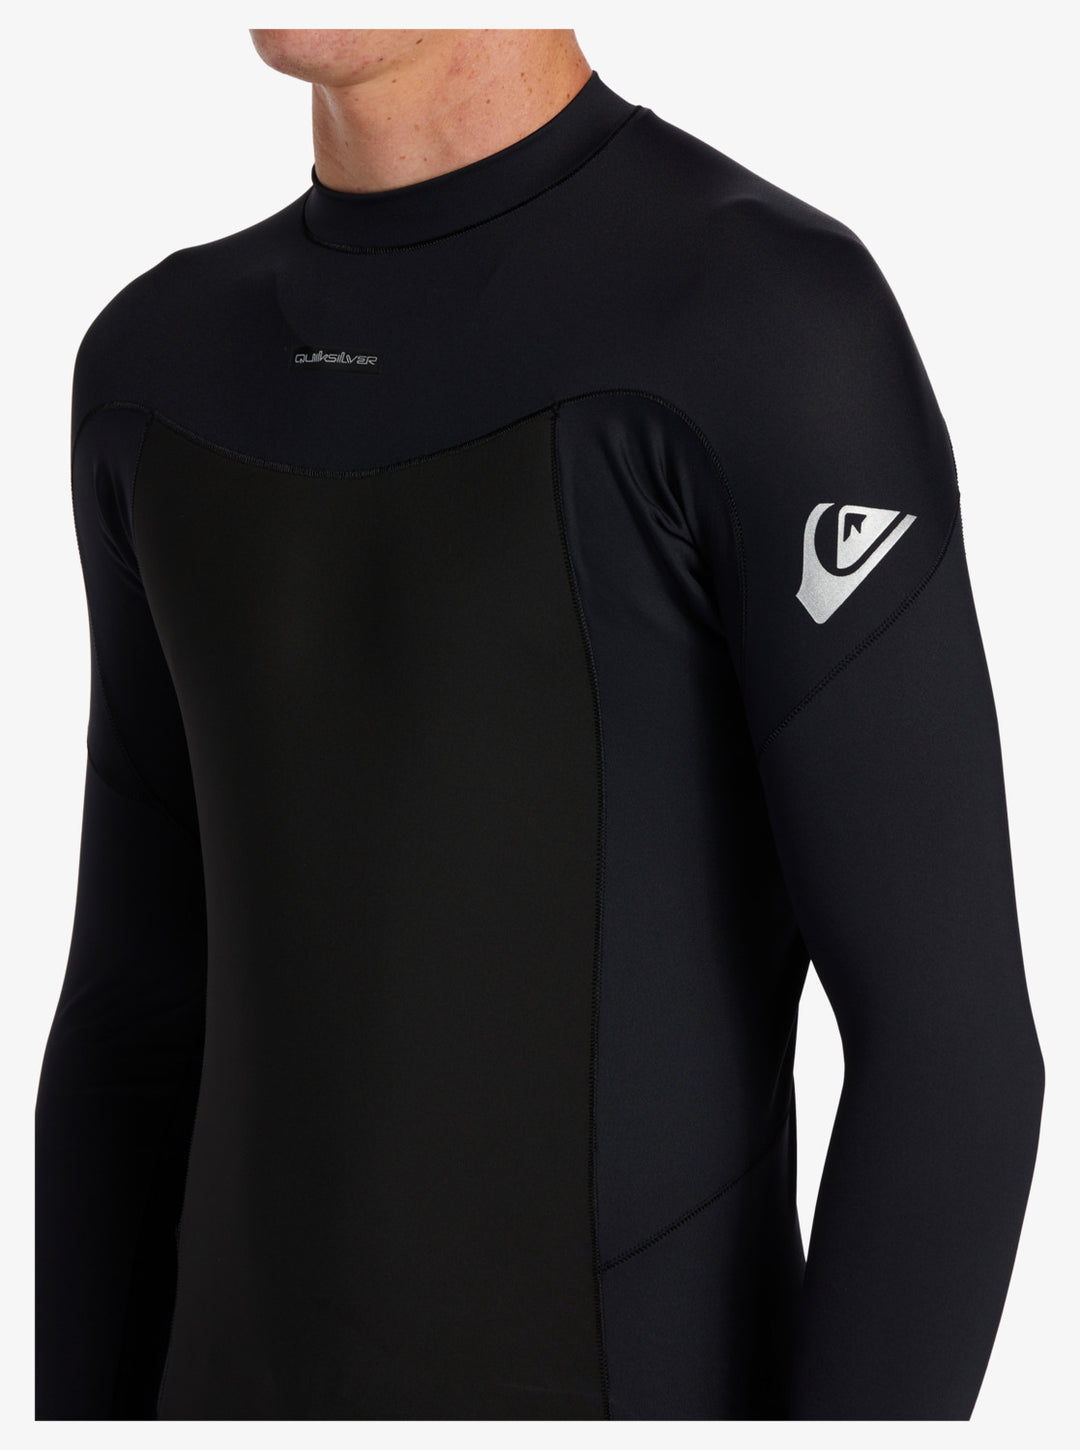 Everday Sessions Neo-shirt Rashie Wetsuit Top